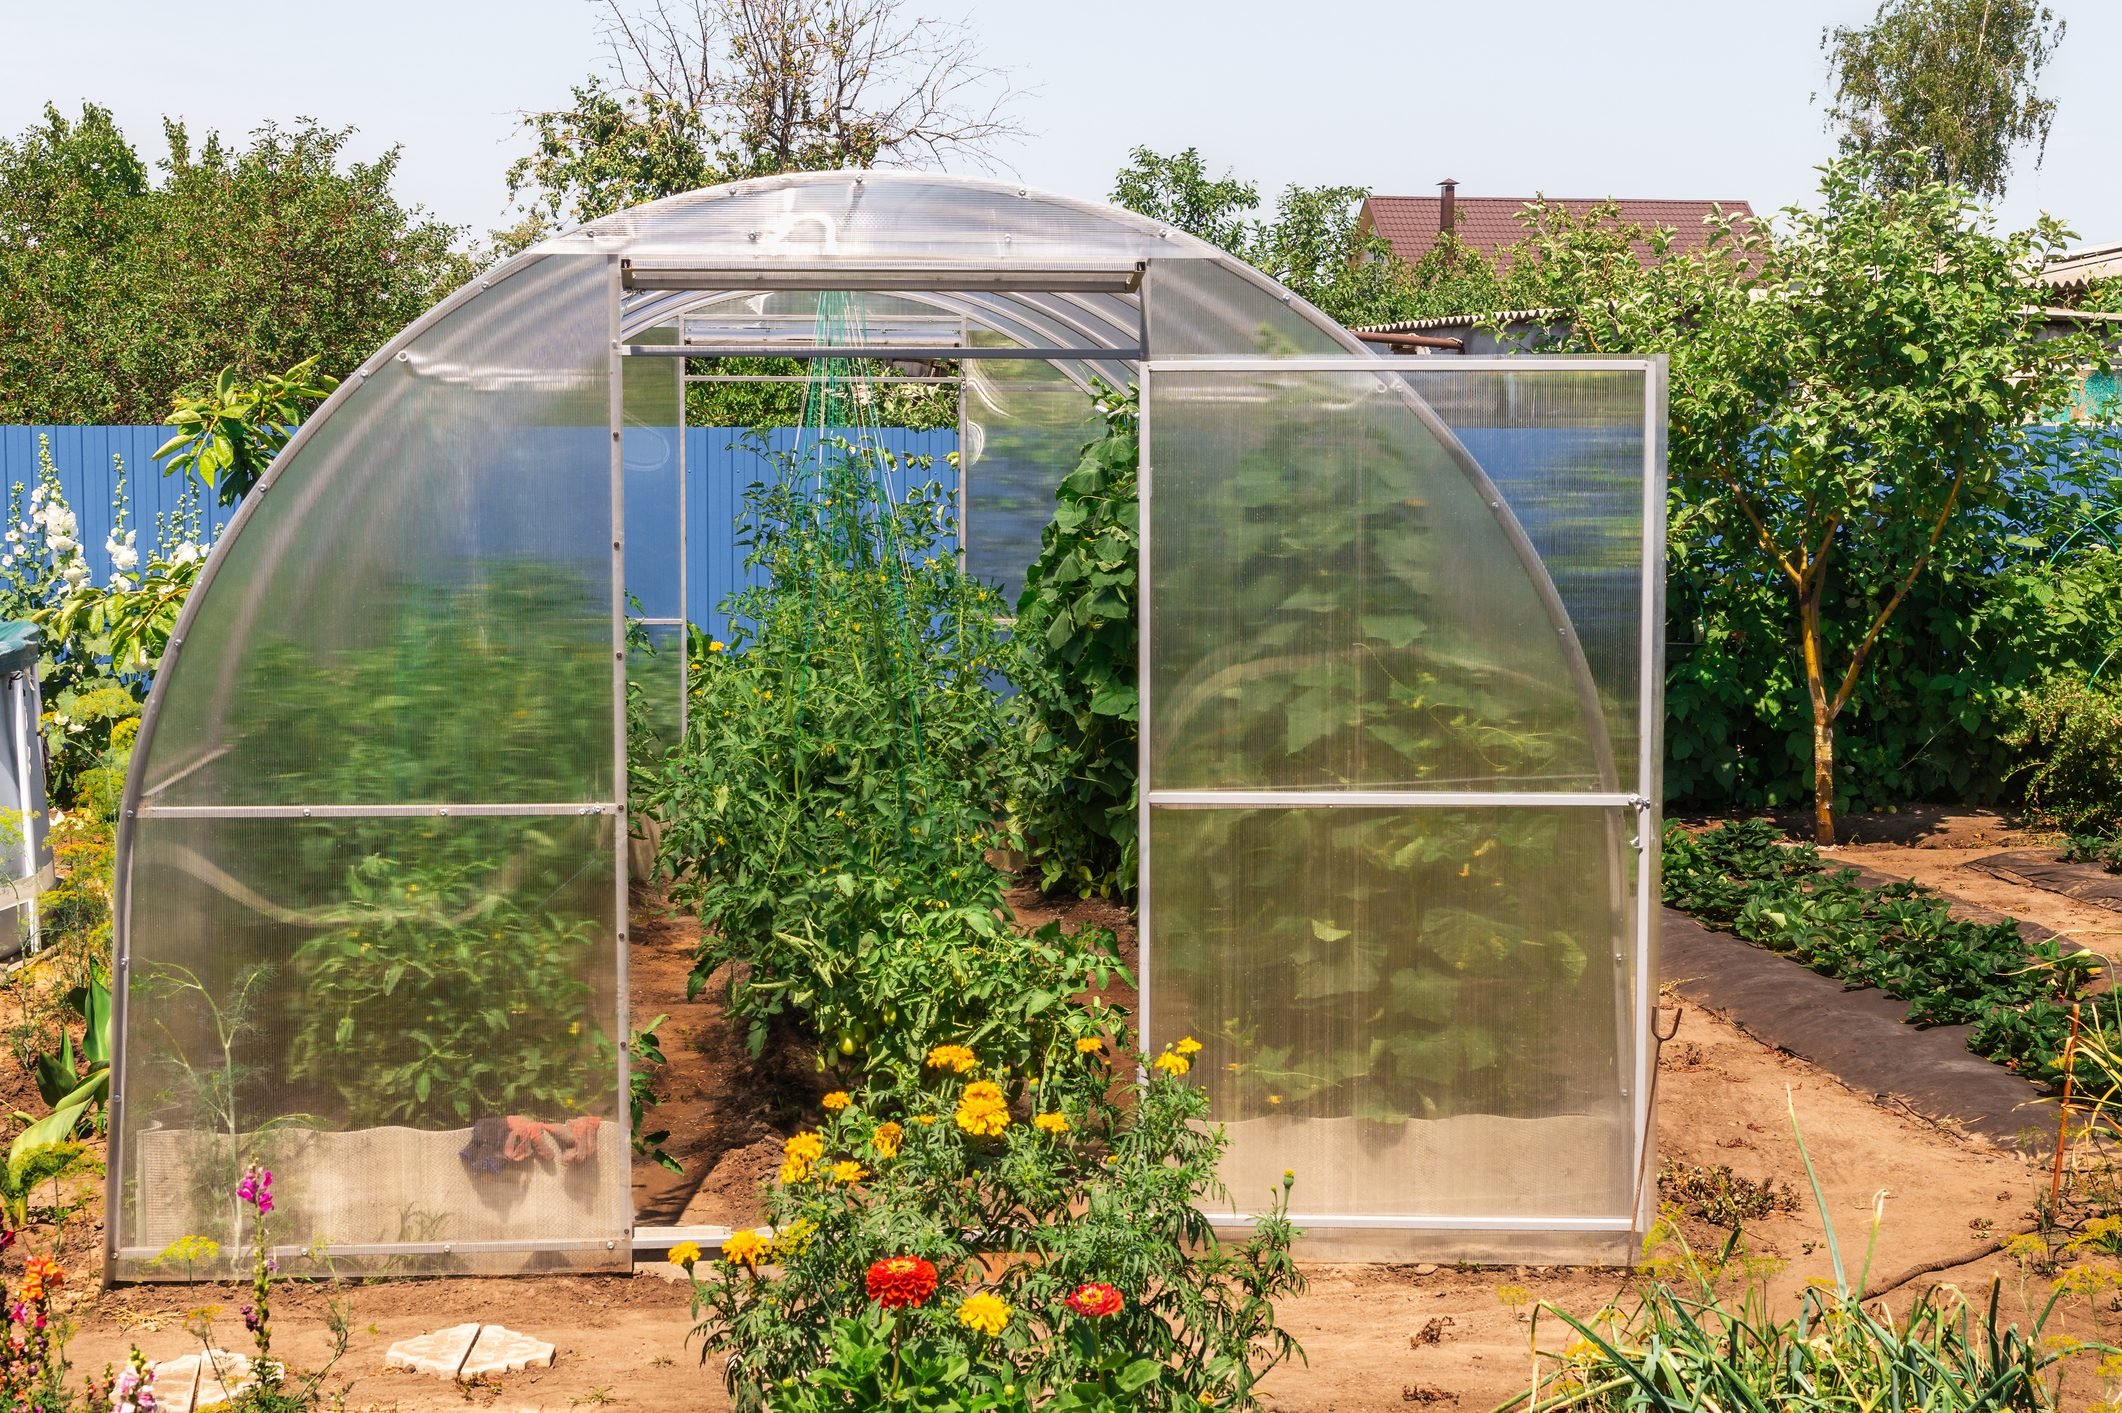 The small greenhouse with growing tomatoes and cucumbers in the garden with green vegetationon a sunny summer day.